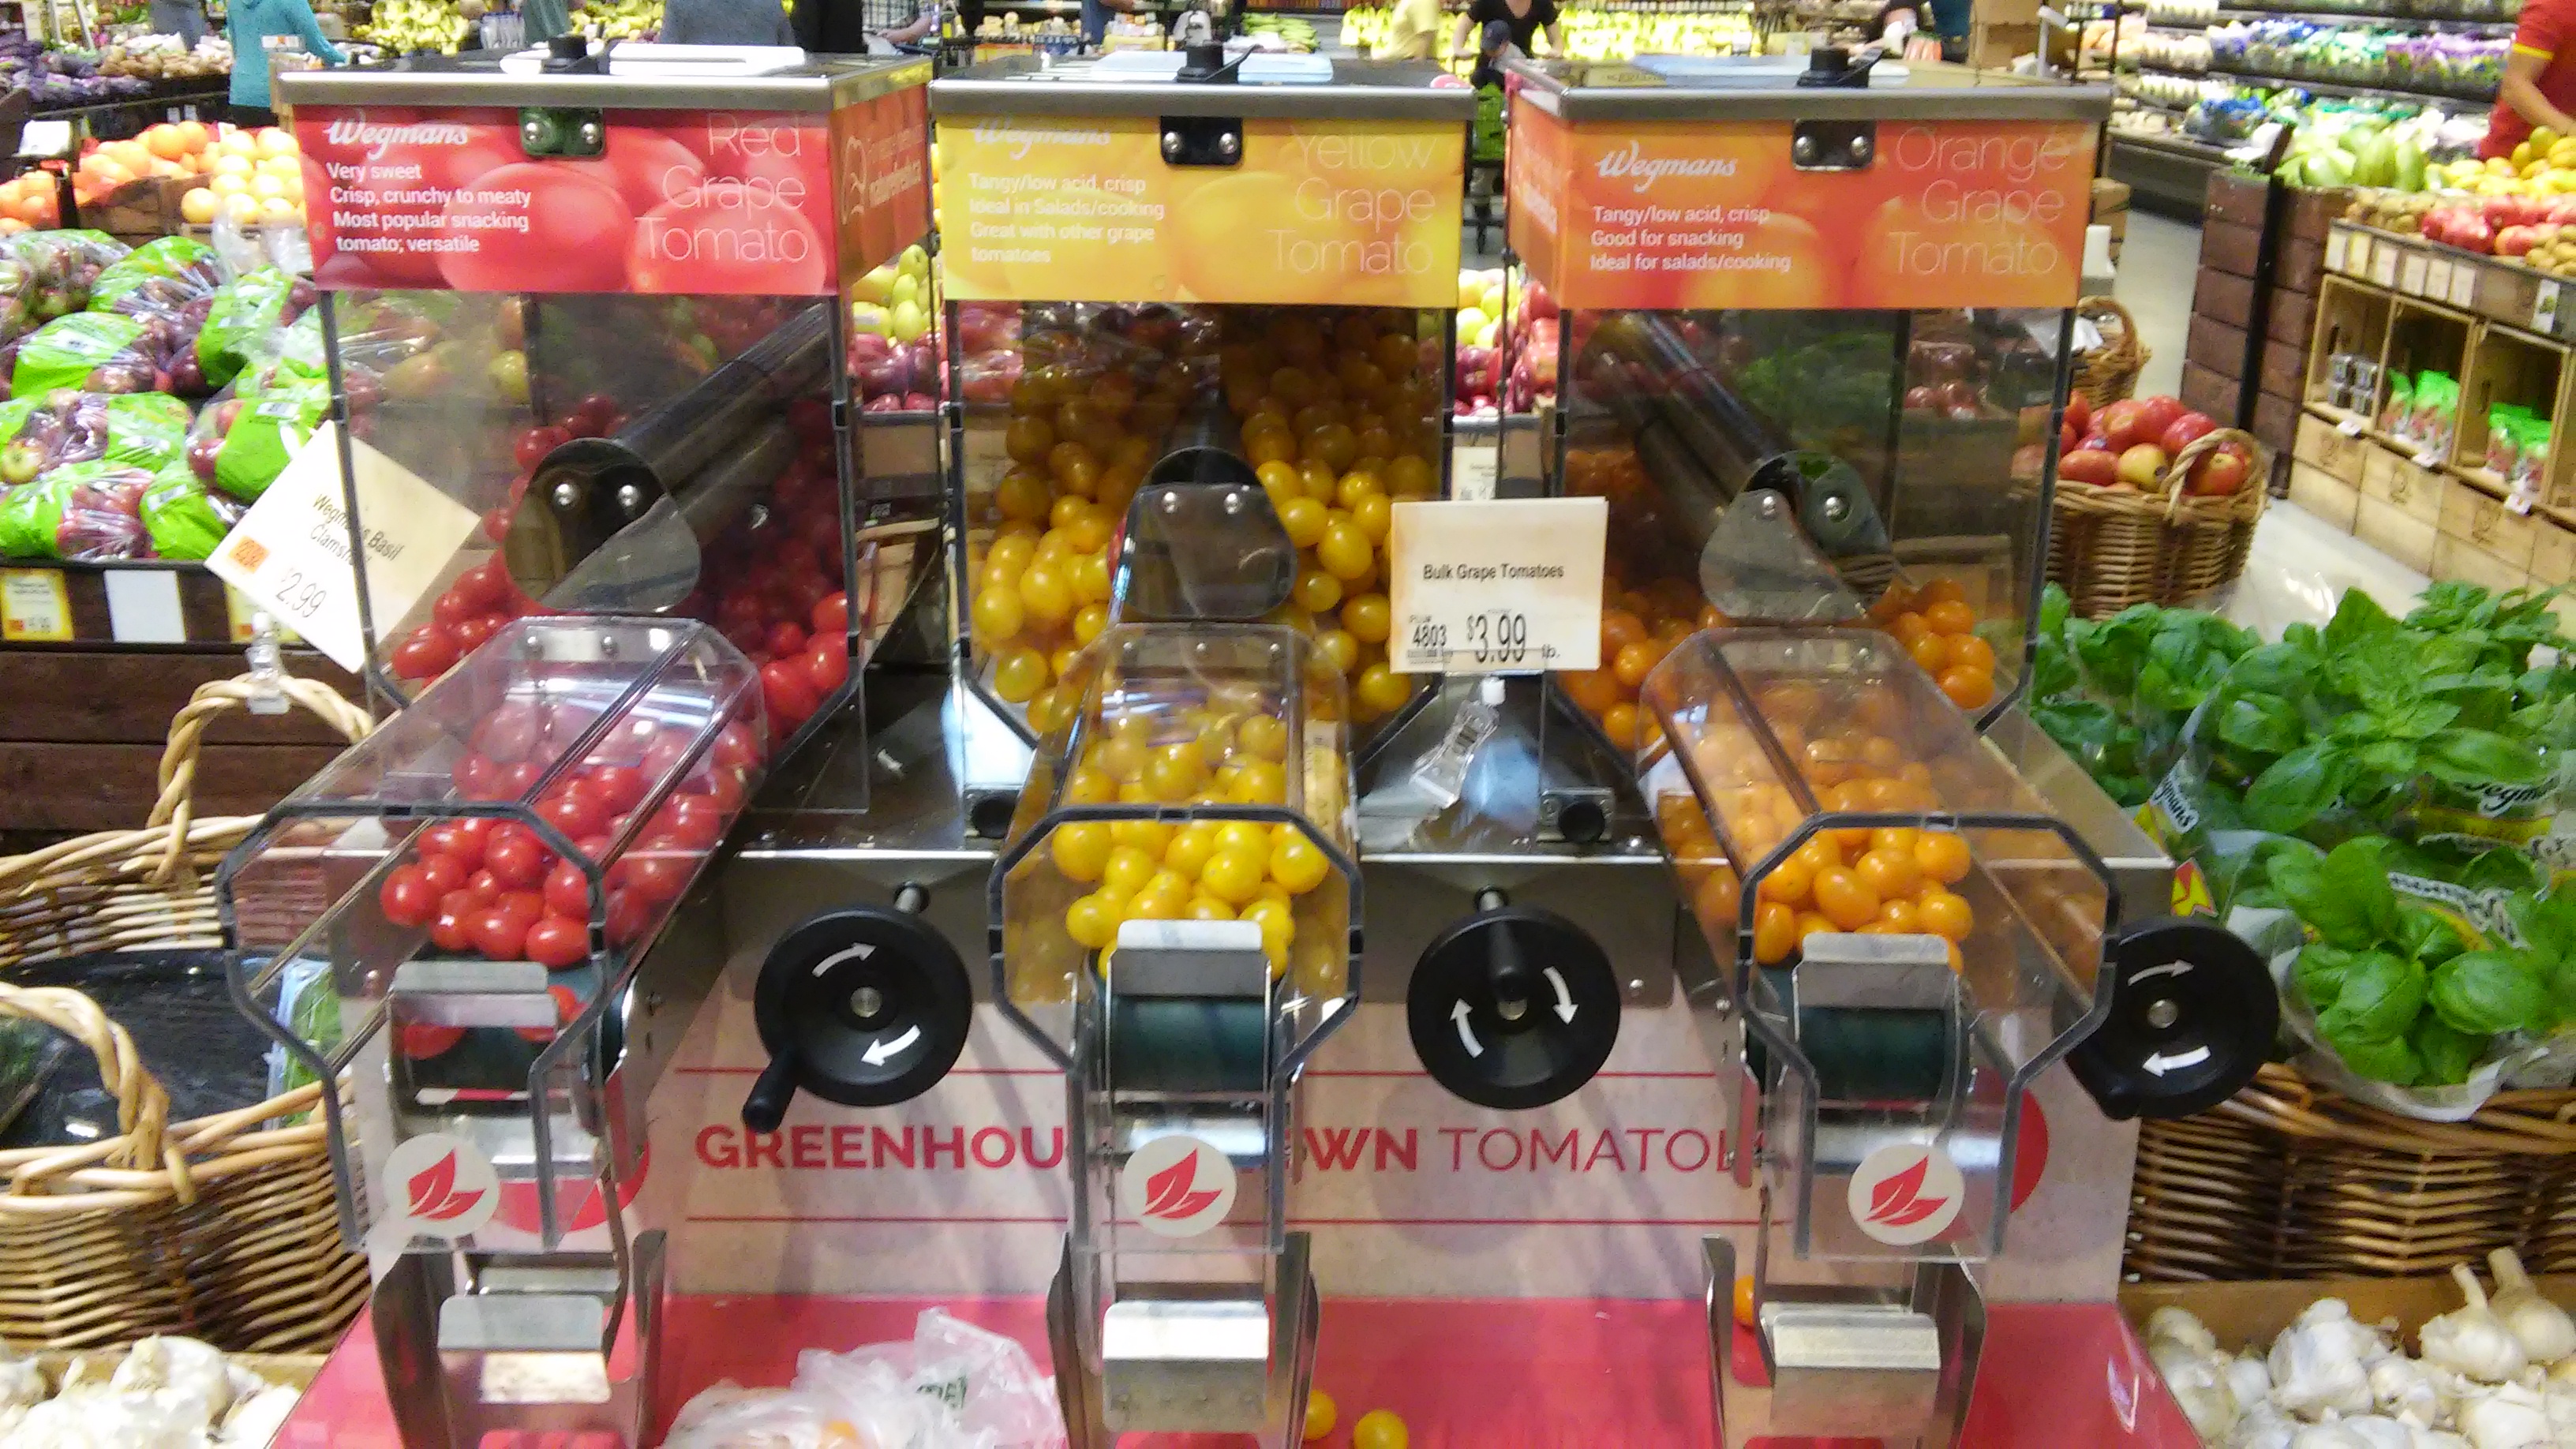 gumball machine style dispensers for tomatoes at Wegmans